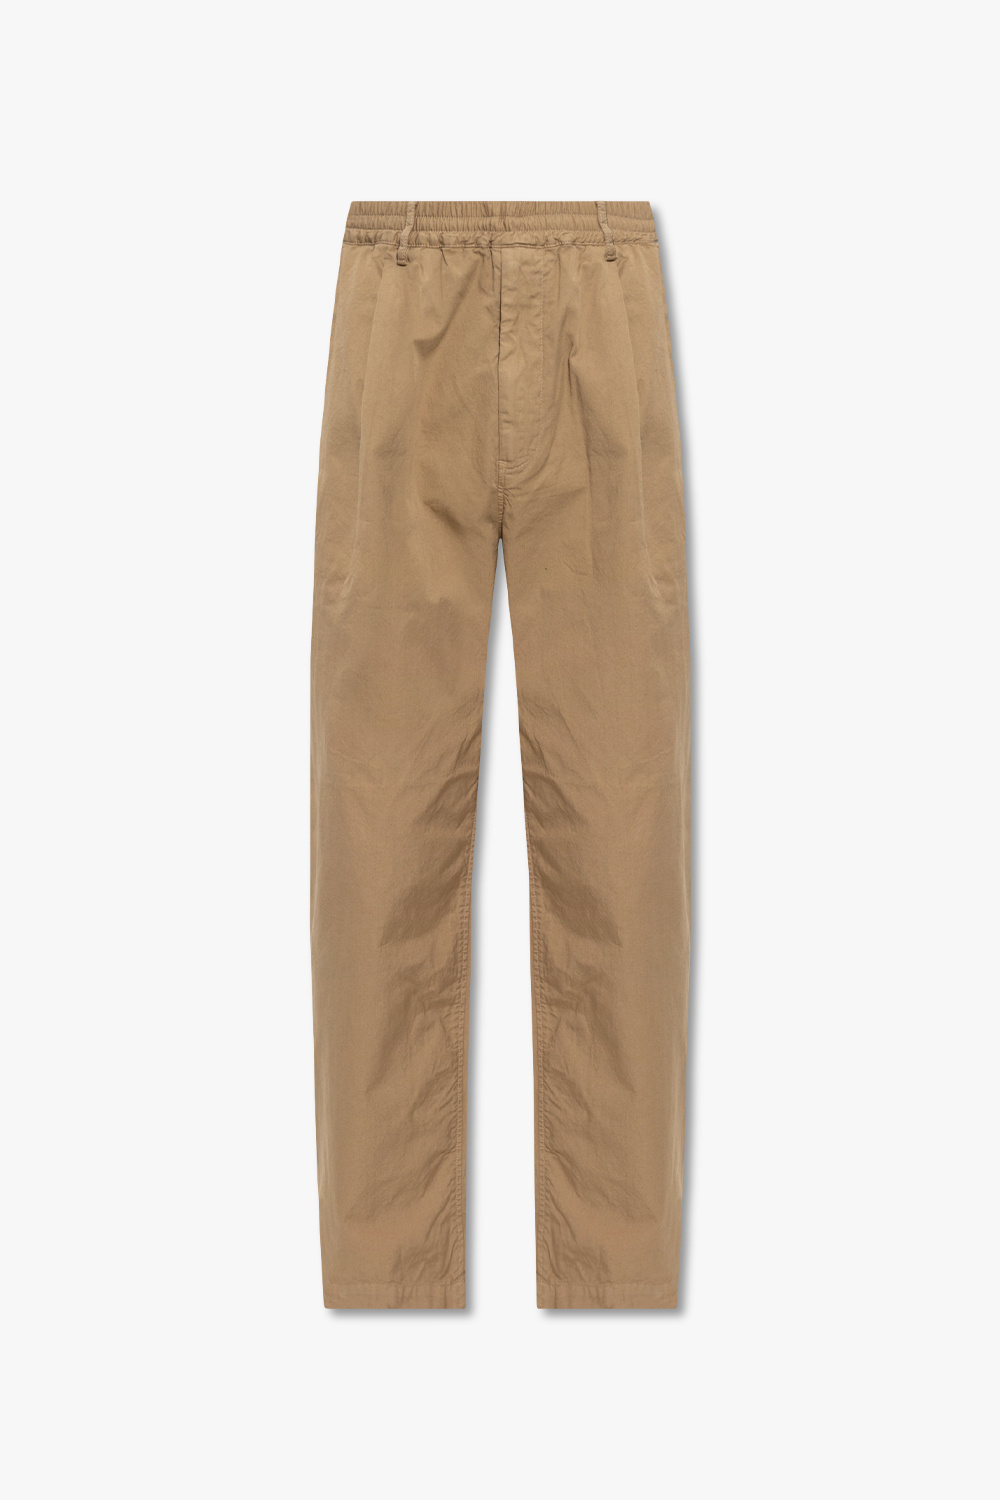 Undercover Trousers with multiple pockets